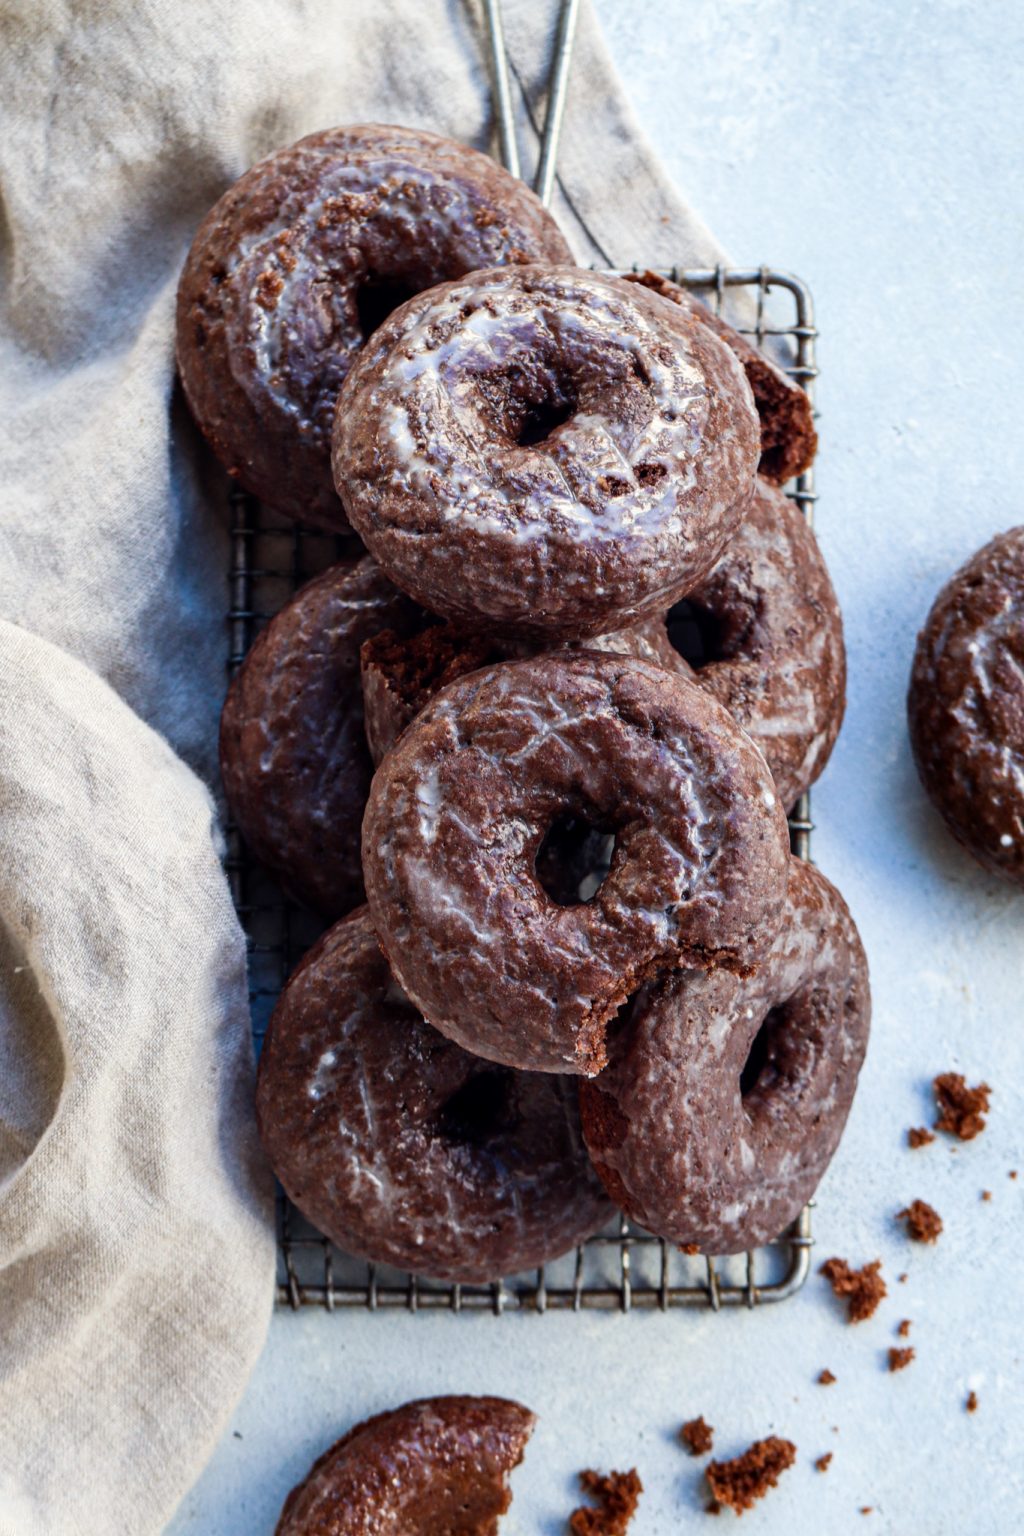 baked chocolate glazed doughnuts | cait's plate